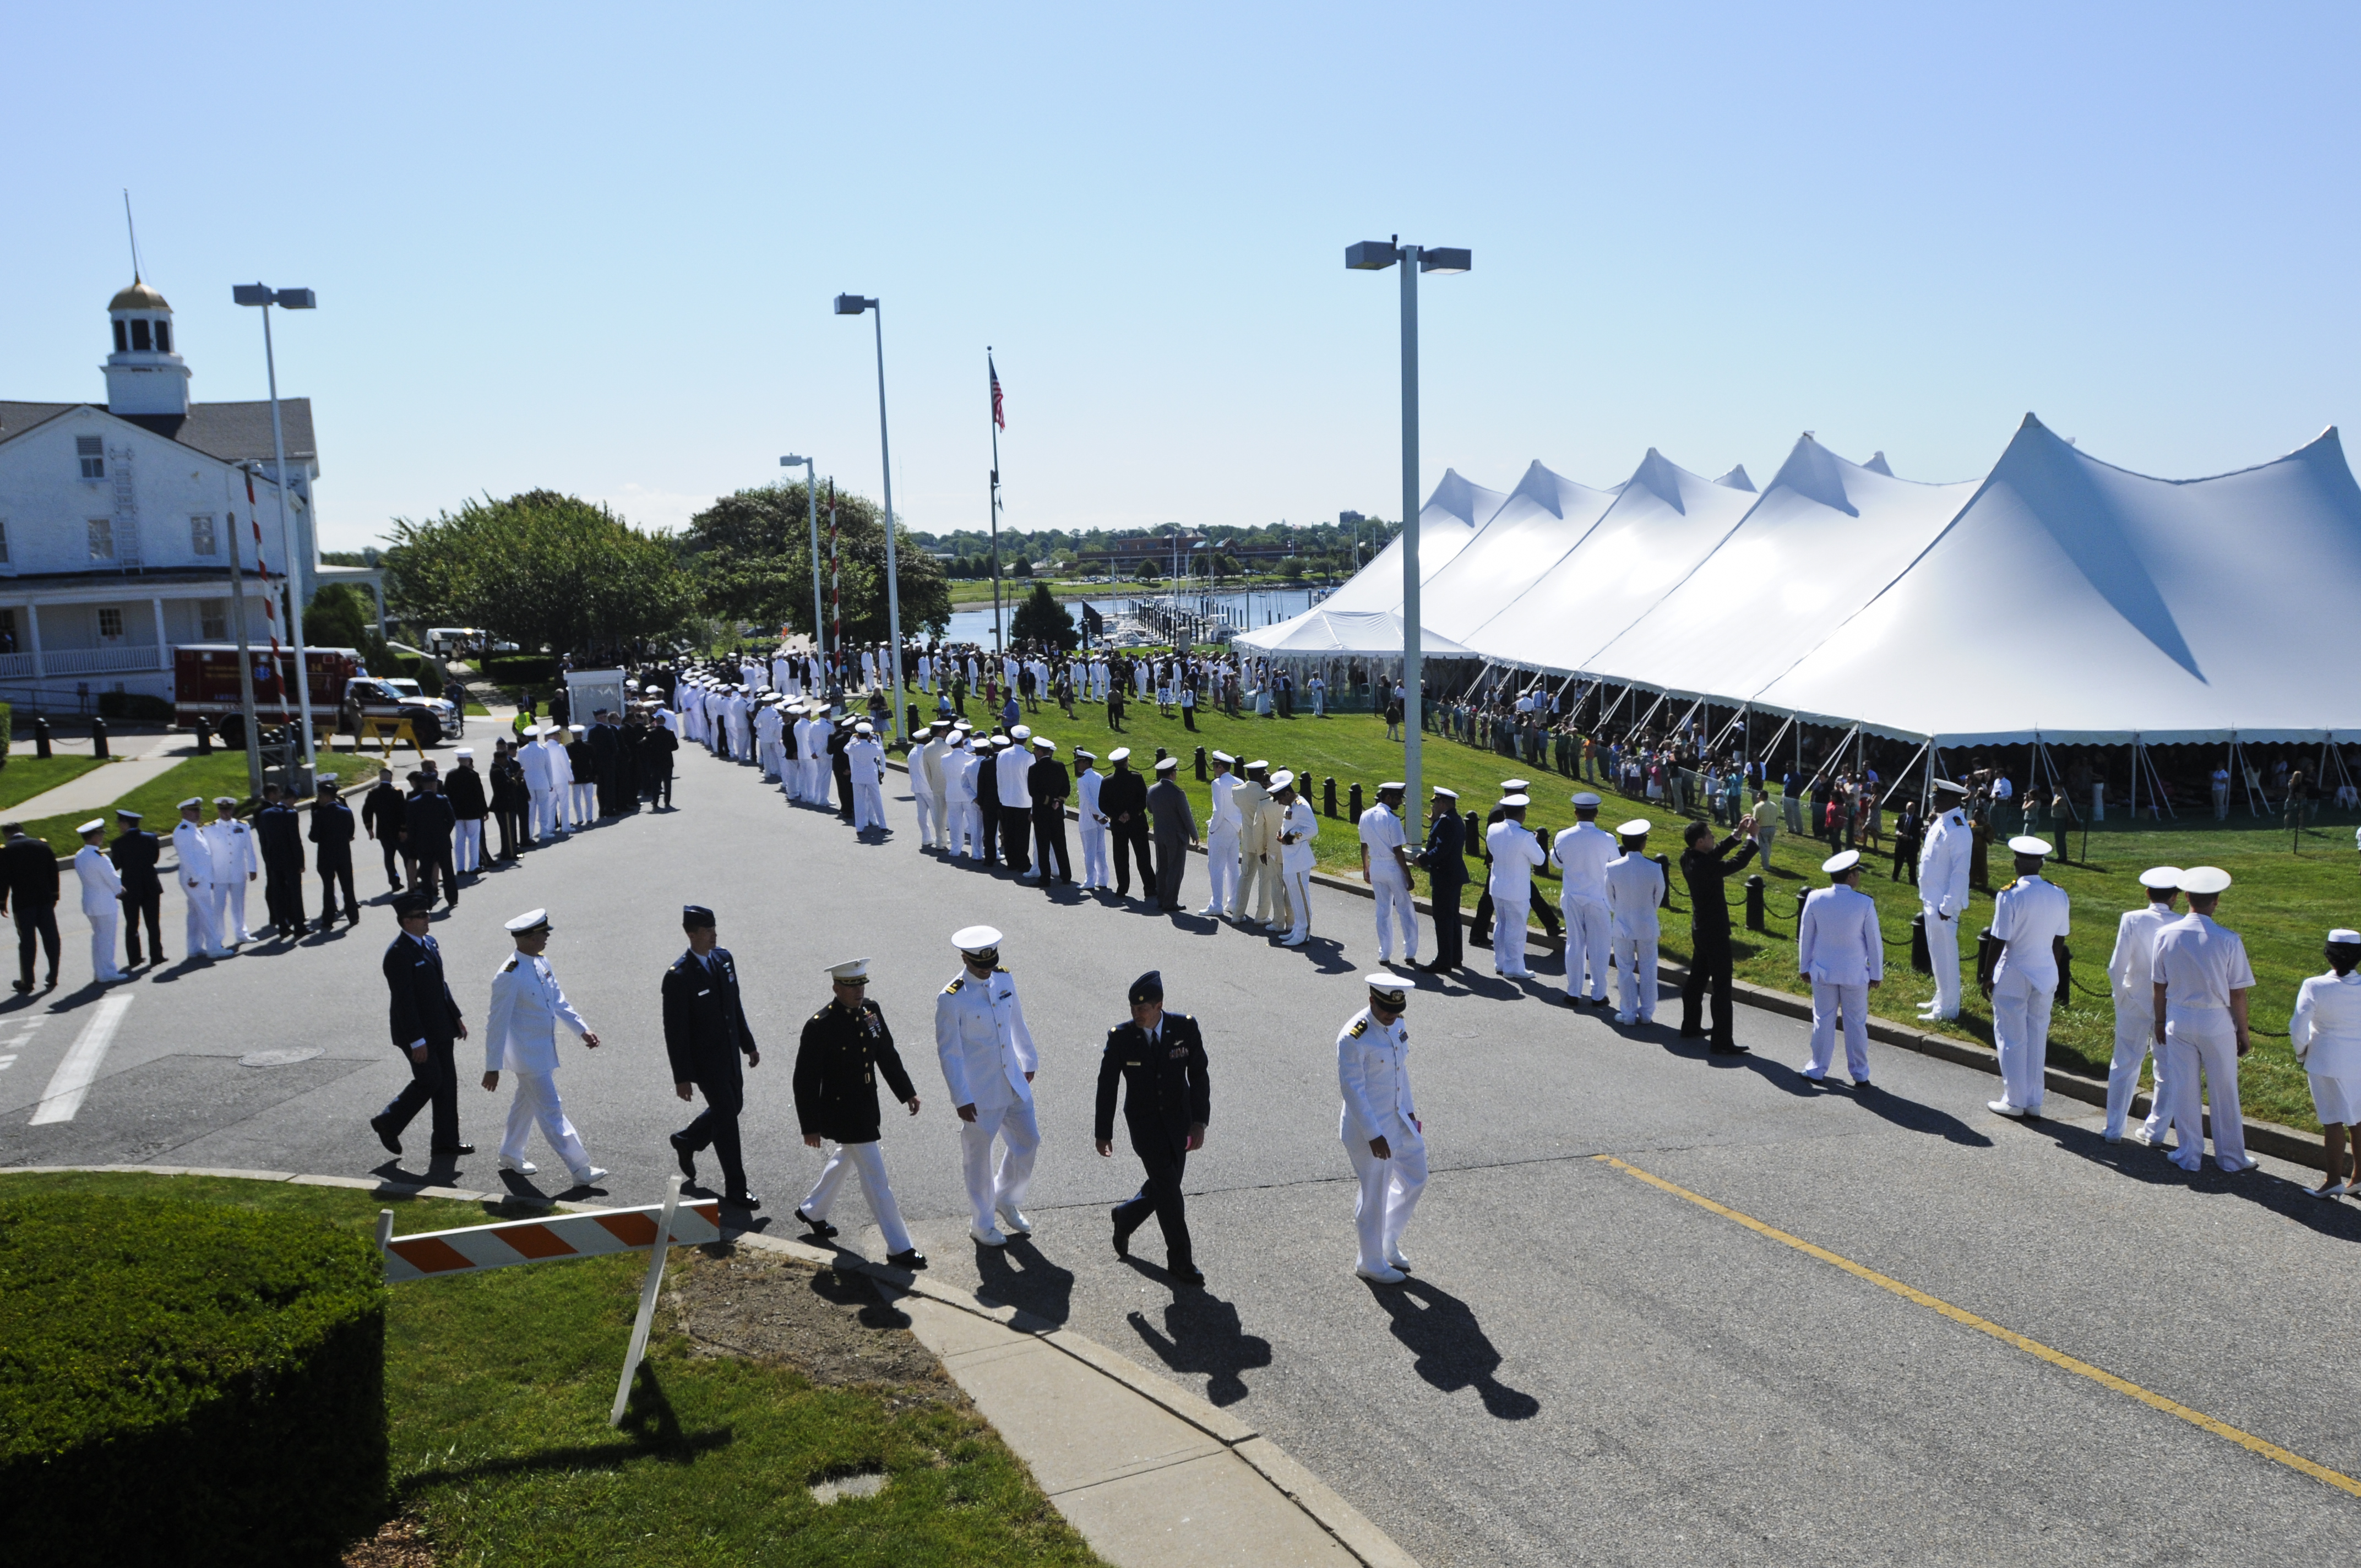 120615-N-LE393-420 NEWPORT, R.I. (June 15, 2012) U.S. Naval War College (NWC) students walk toward the graduation tent before the June 2012 graduation ceremony at the NWC. 535 students graduated today. (U.S. Navy photo by Mass Communication Specialist 2nd Class Eric Dietrich/Released)